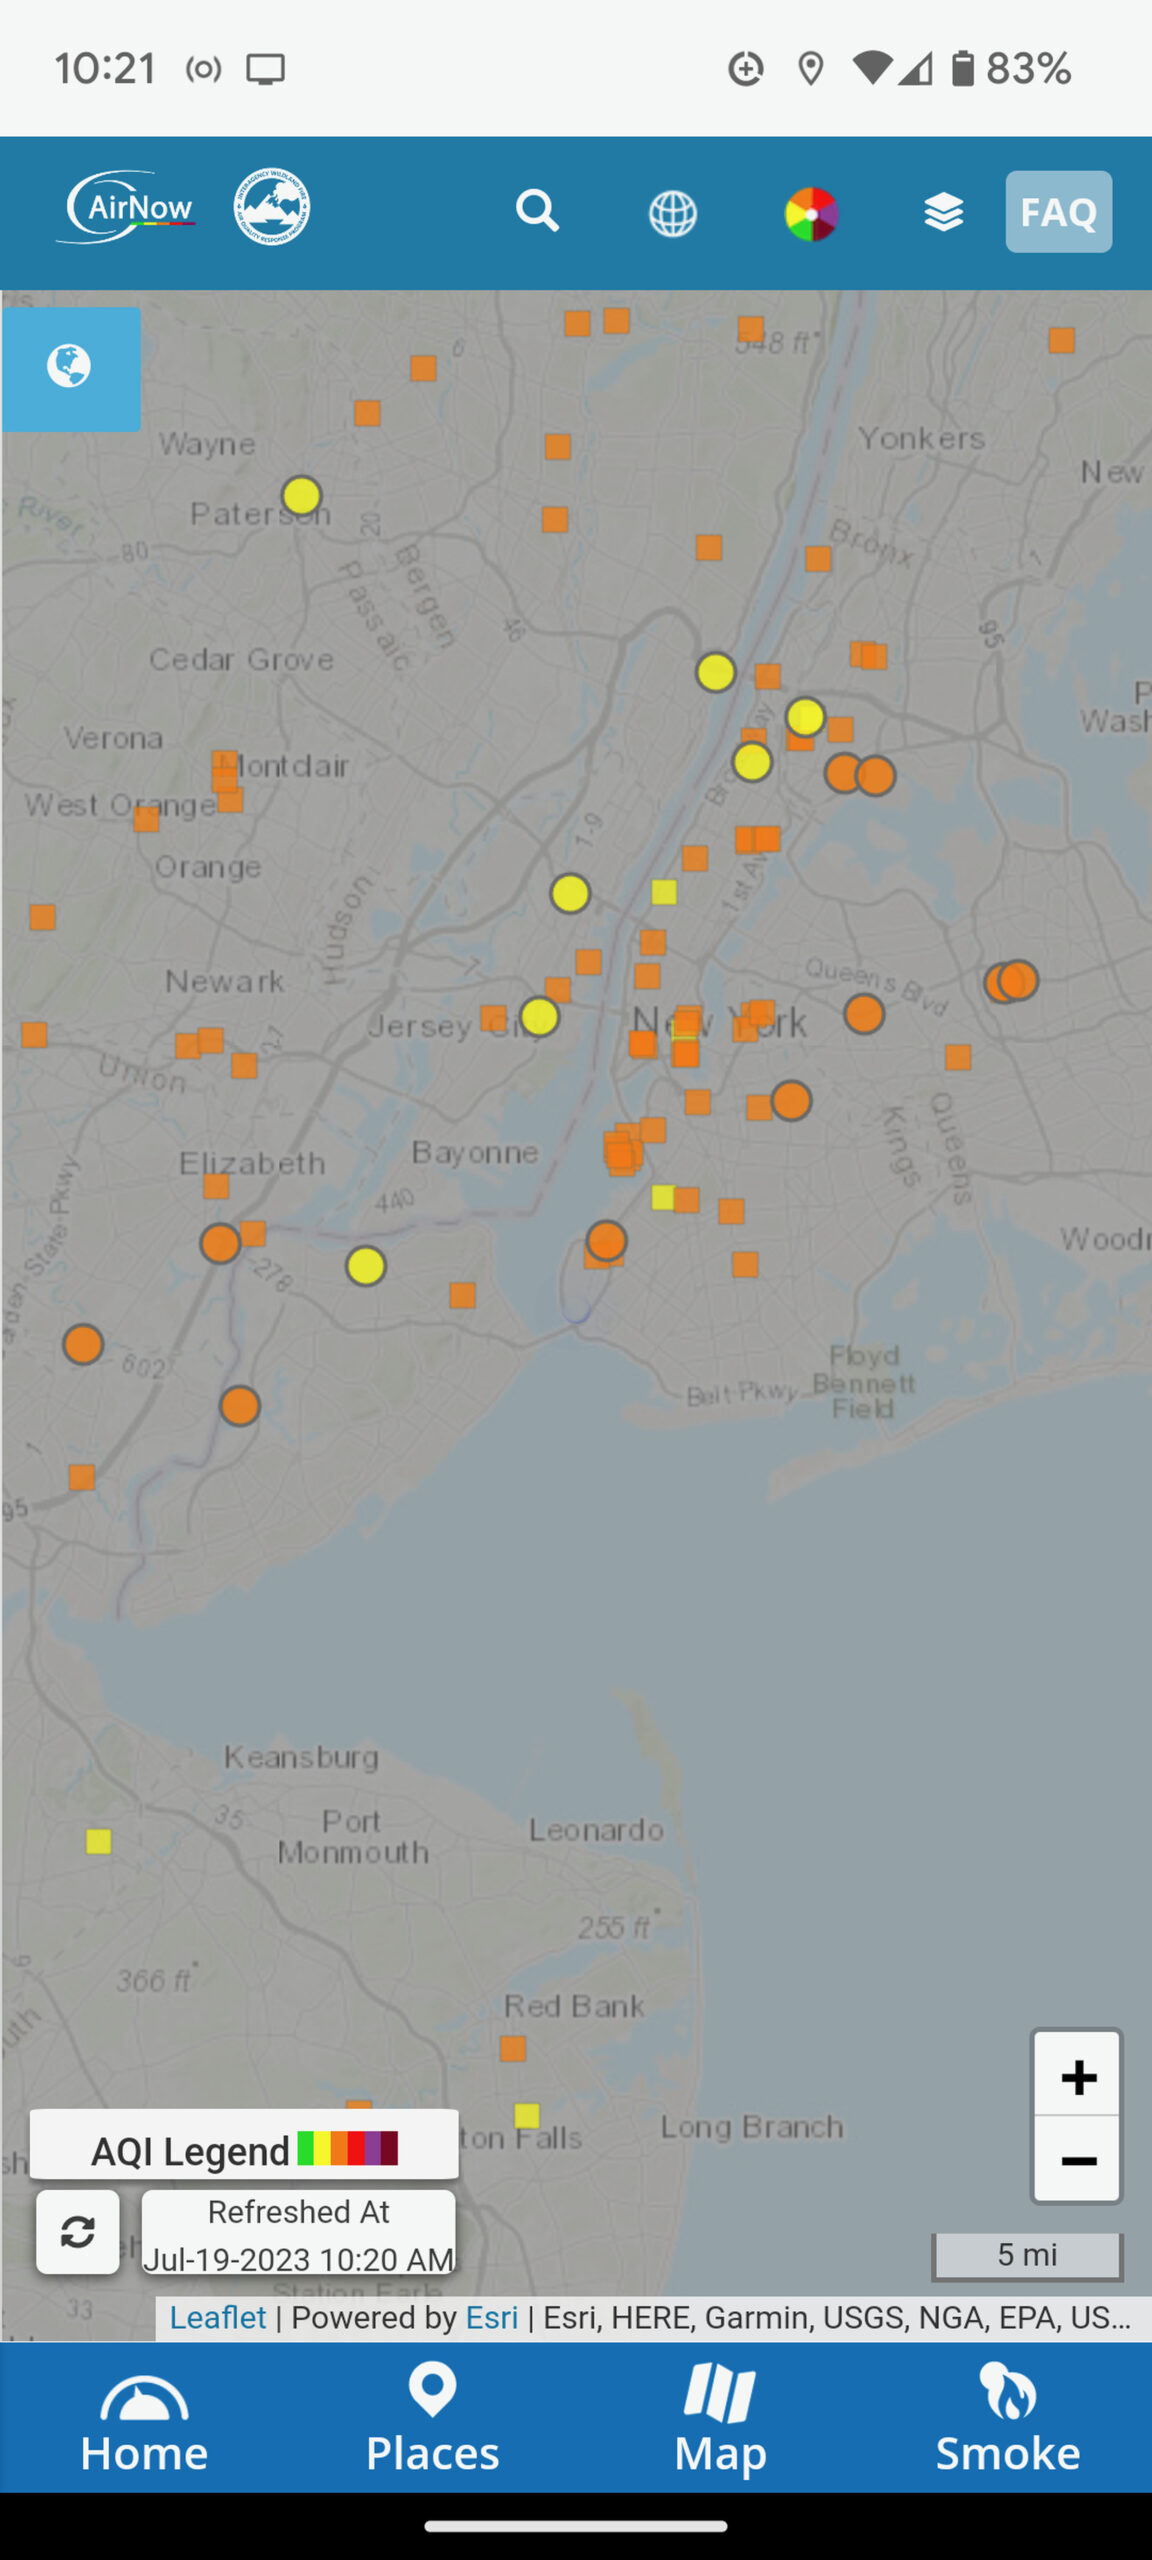 Map from AirNow showing orange and yellow dots indicating air conditions in the NYC area.